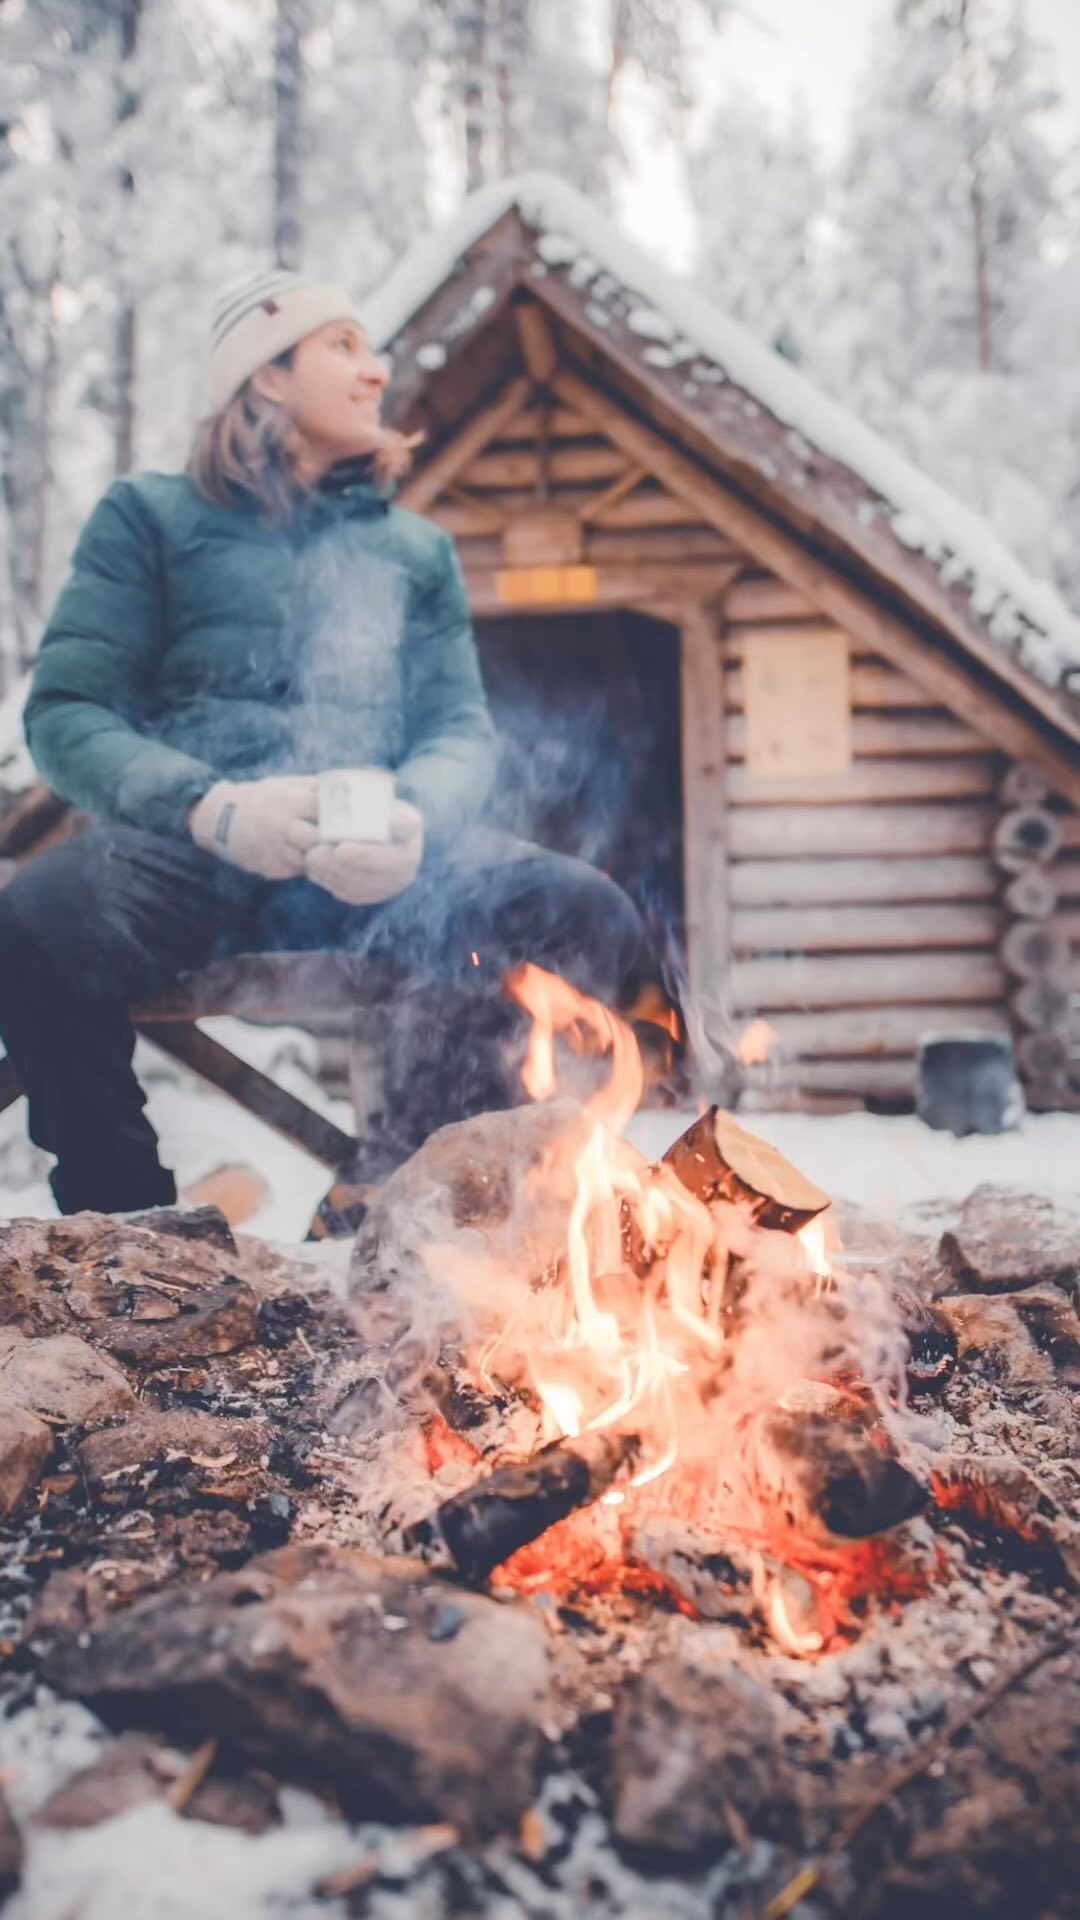 Perfect weather for winter hiking and enjoying quiet moments in nature. Reels by @tonieskelinen #visitrovaniemi #hiking #winter #nature #campfire